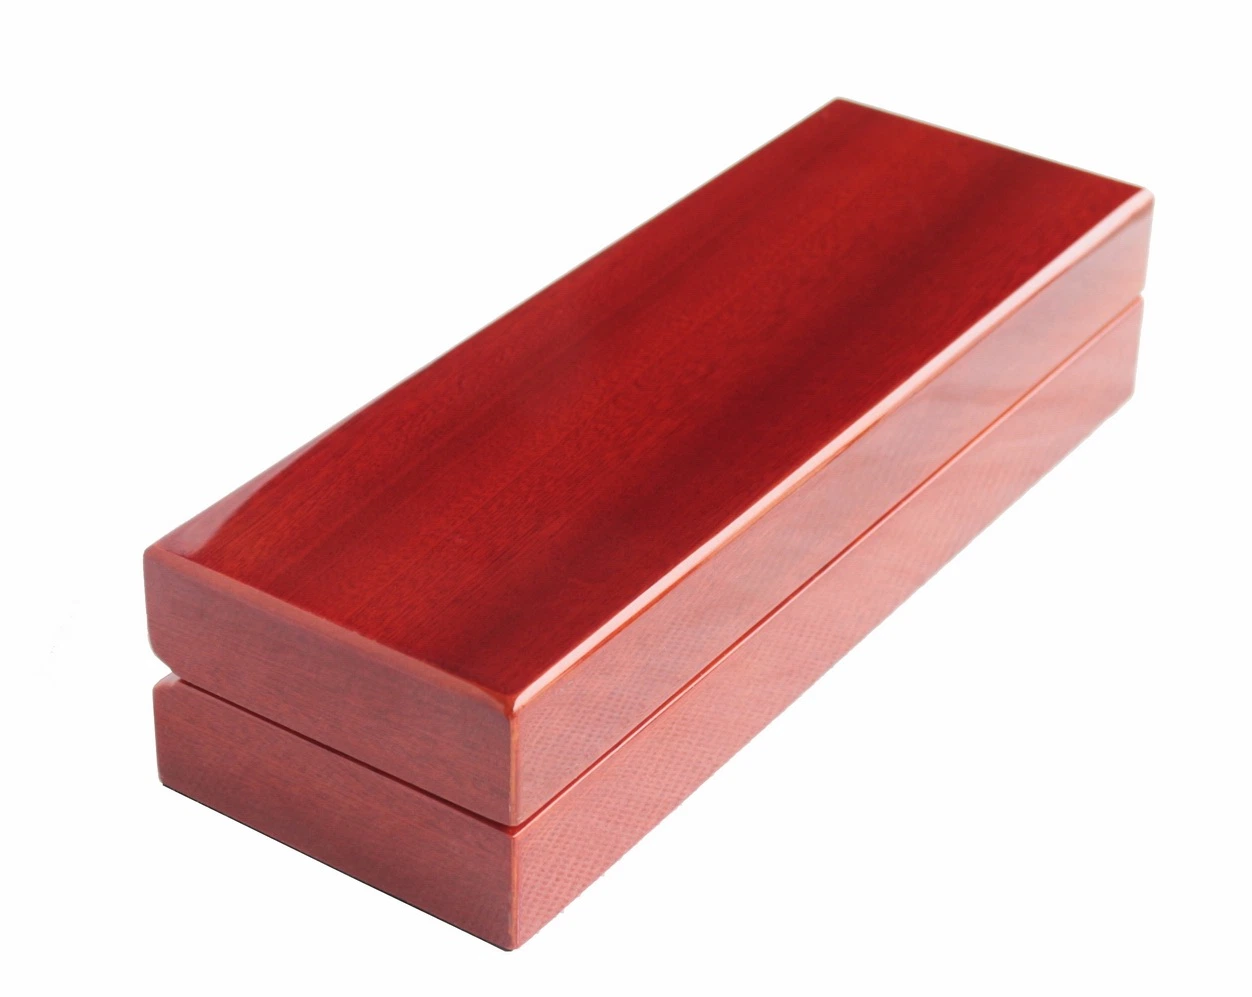 Glossy Wood Pen Gift Box Pen Storage Collecting Packaging Box Packing Gift Box Case Pen Display Box Wooden Jewelry Box Lacquer Wooden Storage Box